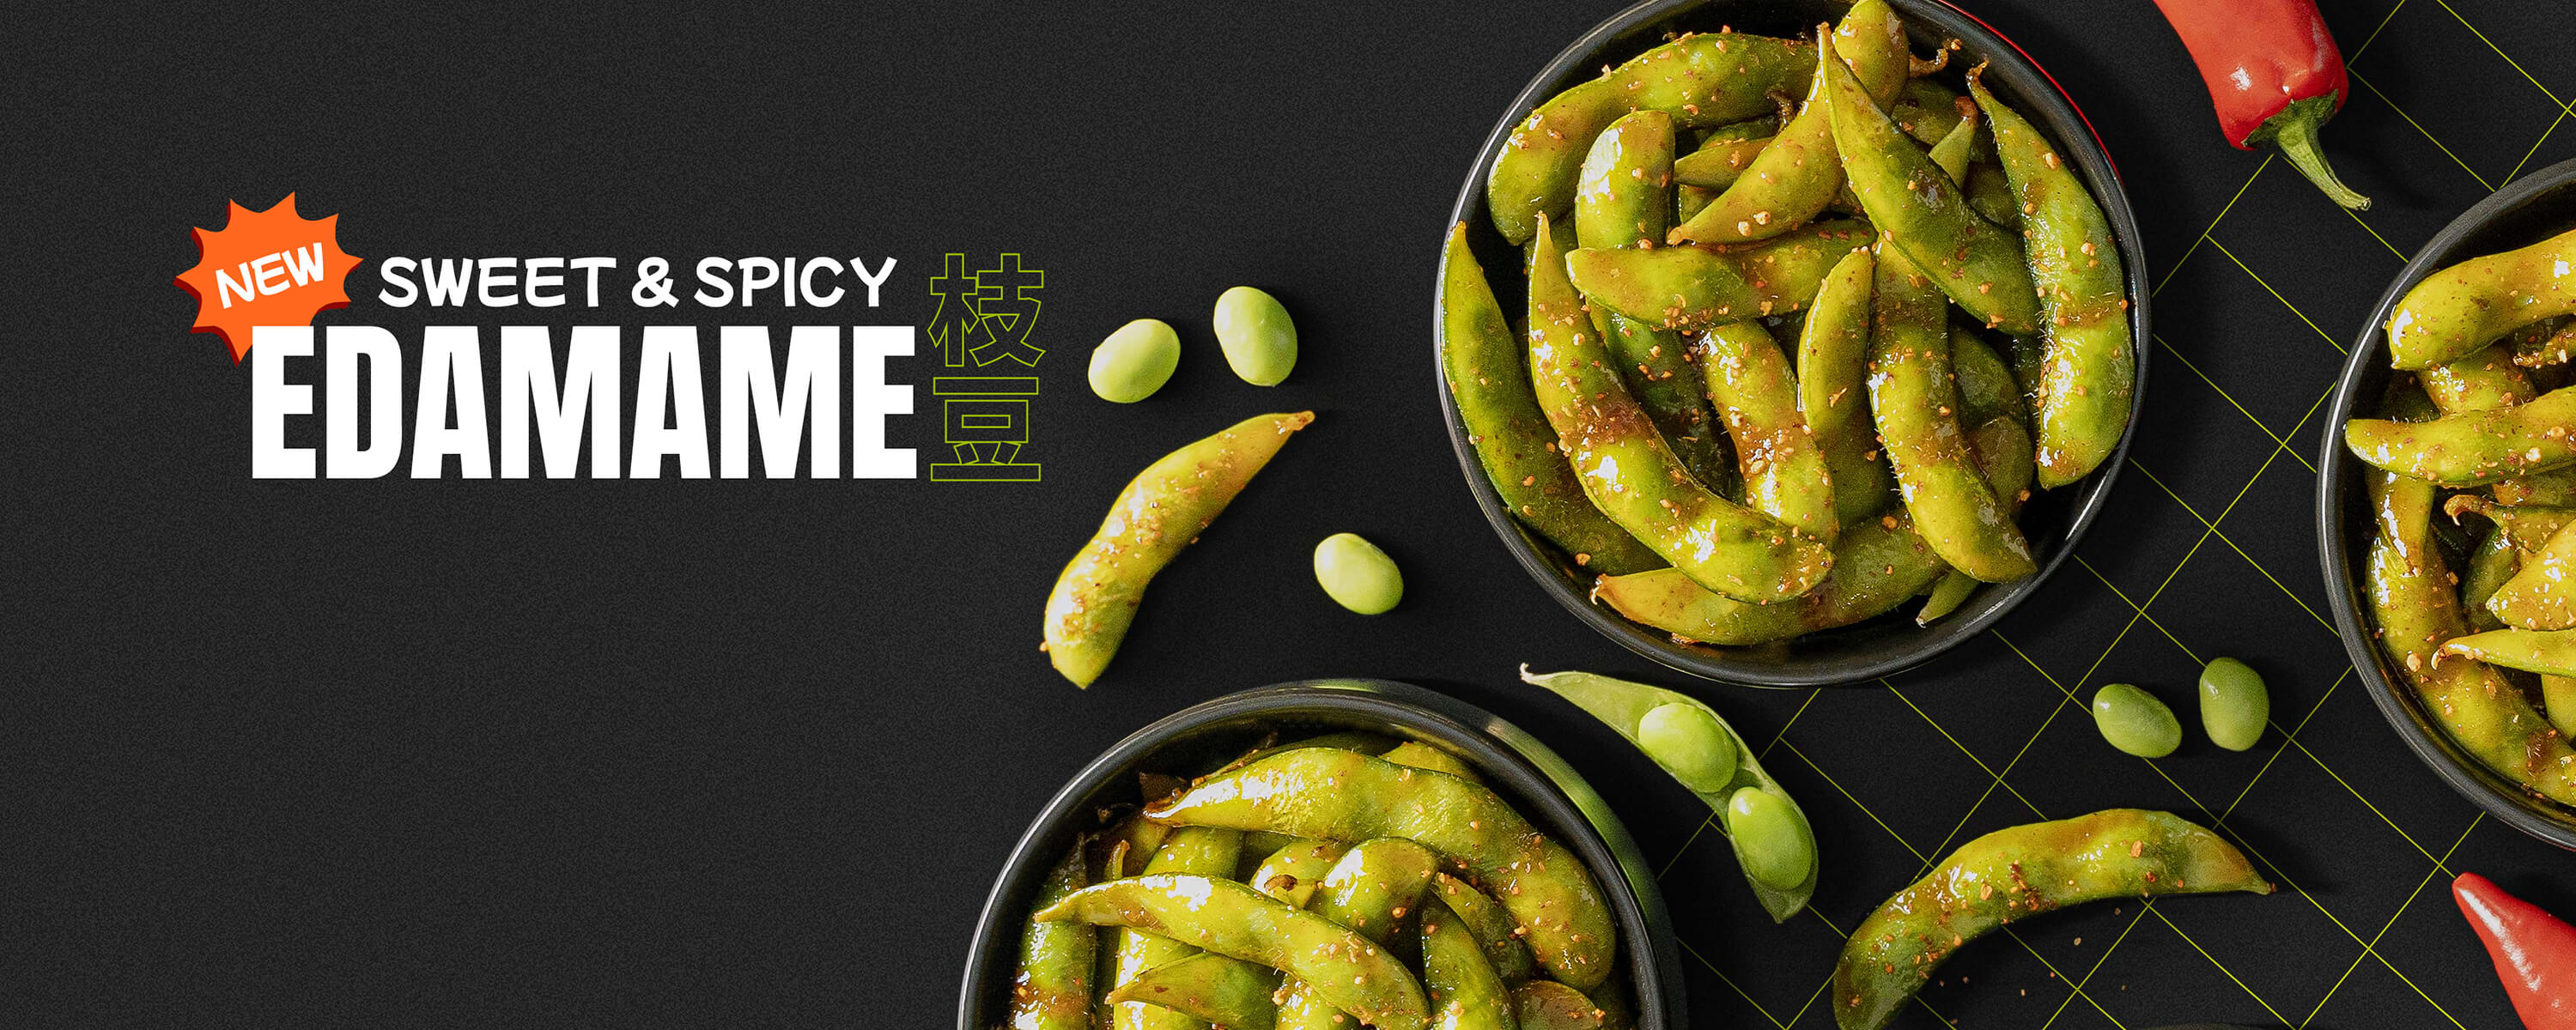 NEW SPICY AND SWEET EDAMAME